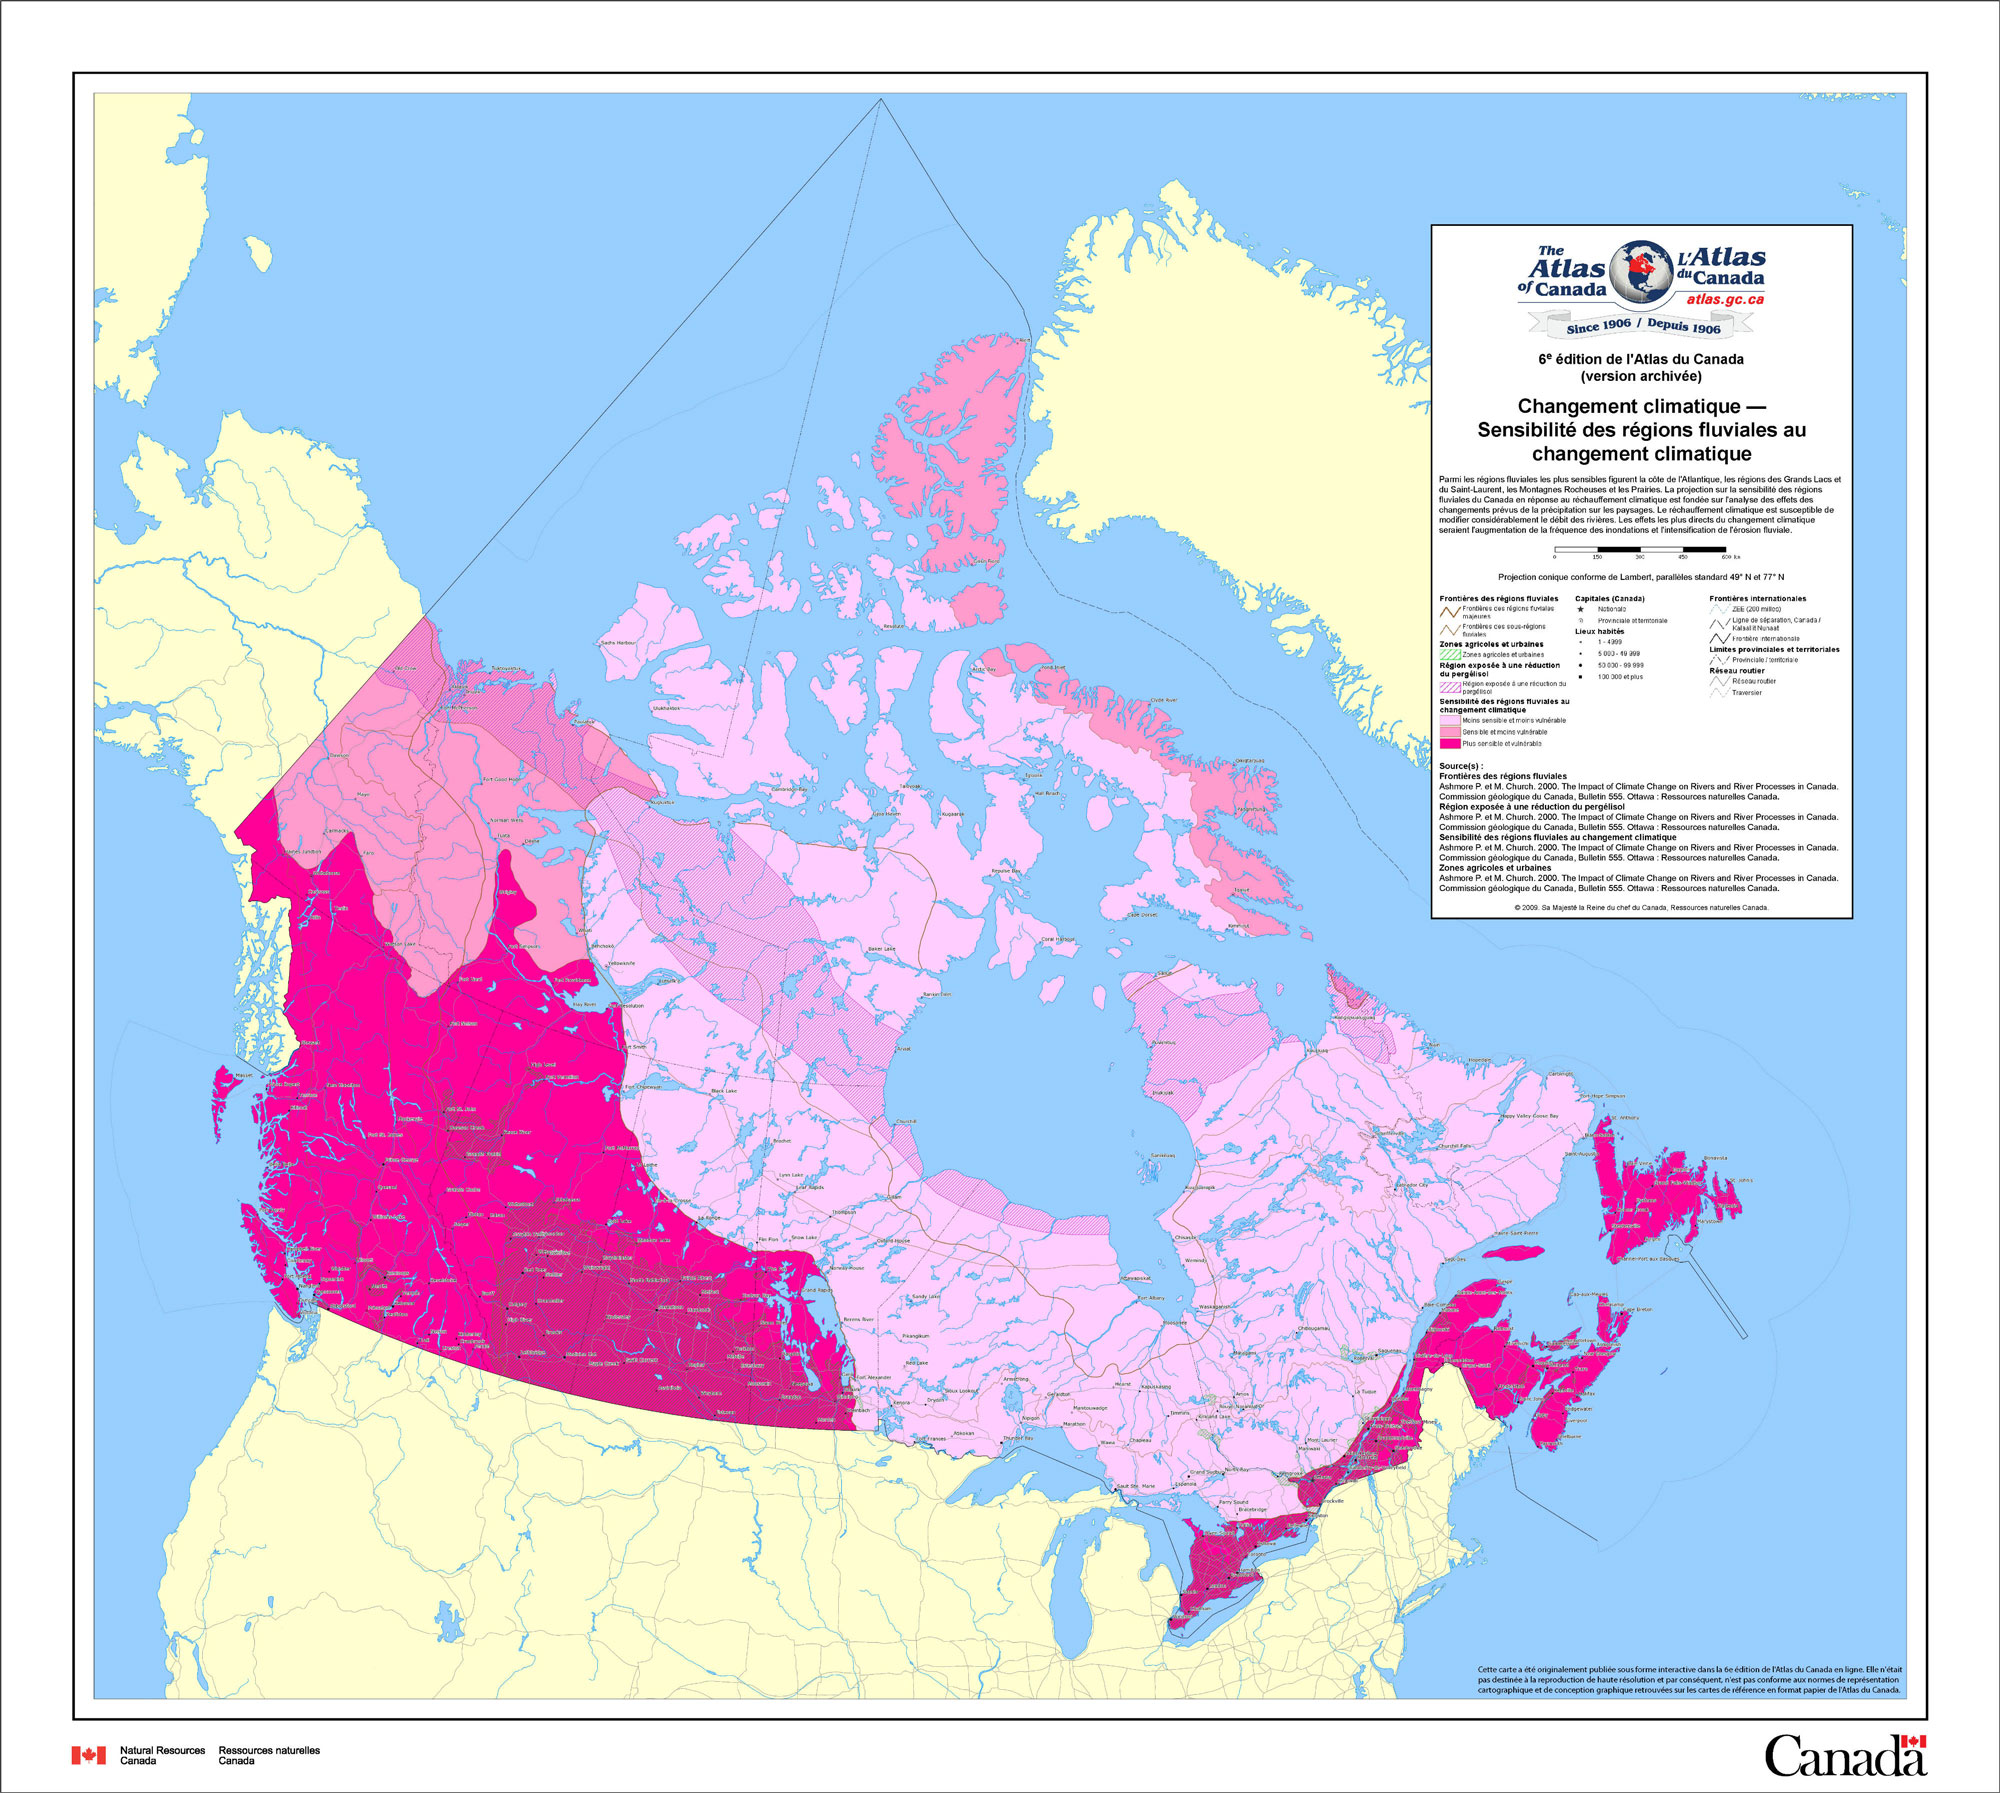 Geological map of Canada that represents flood risk areas